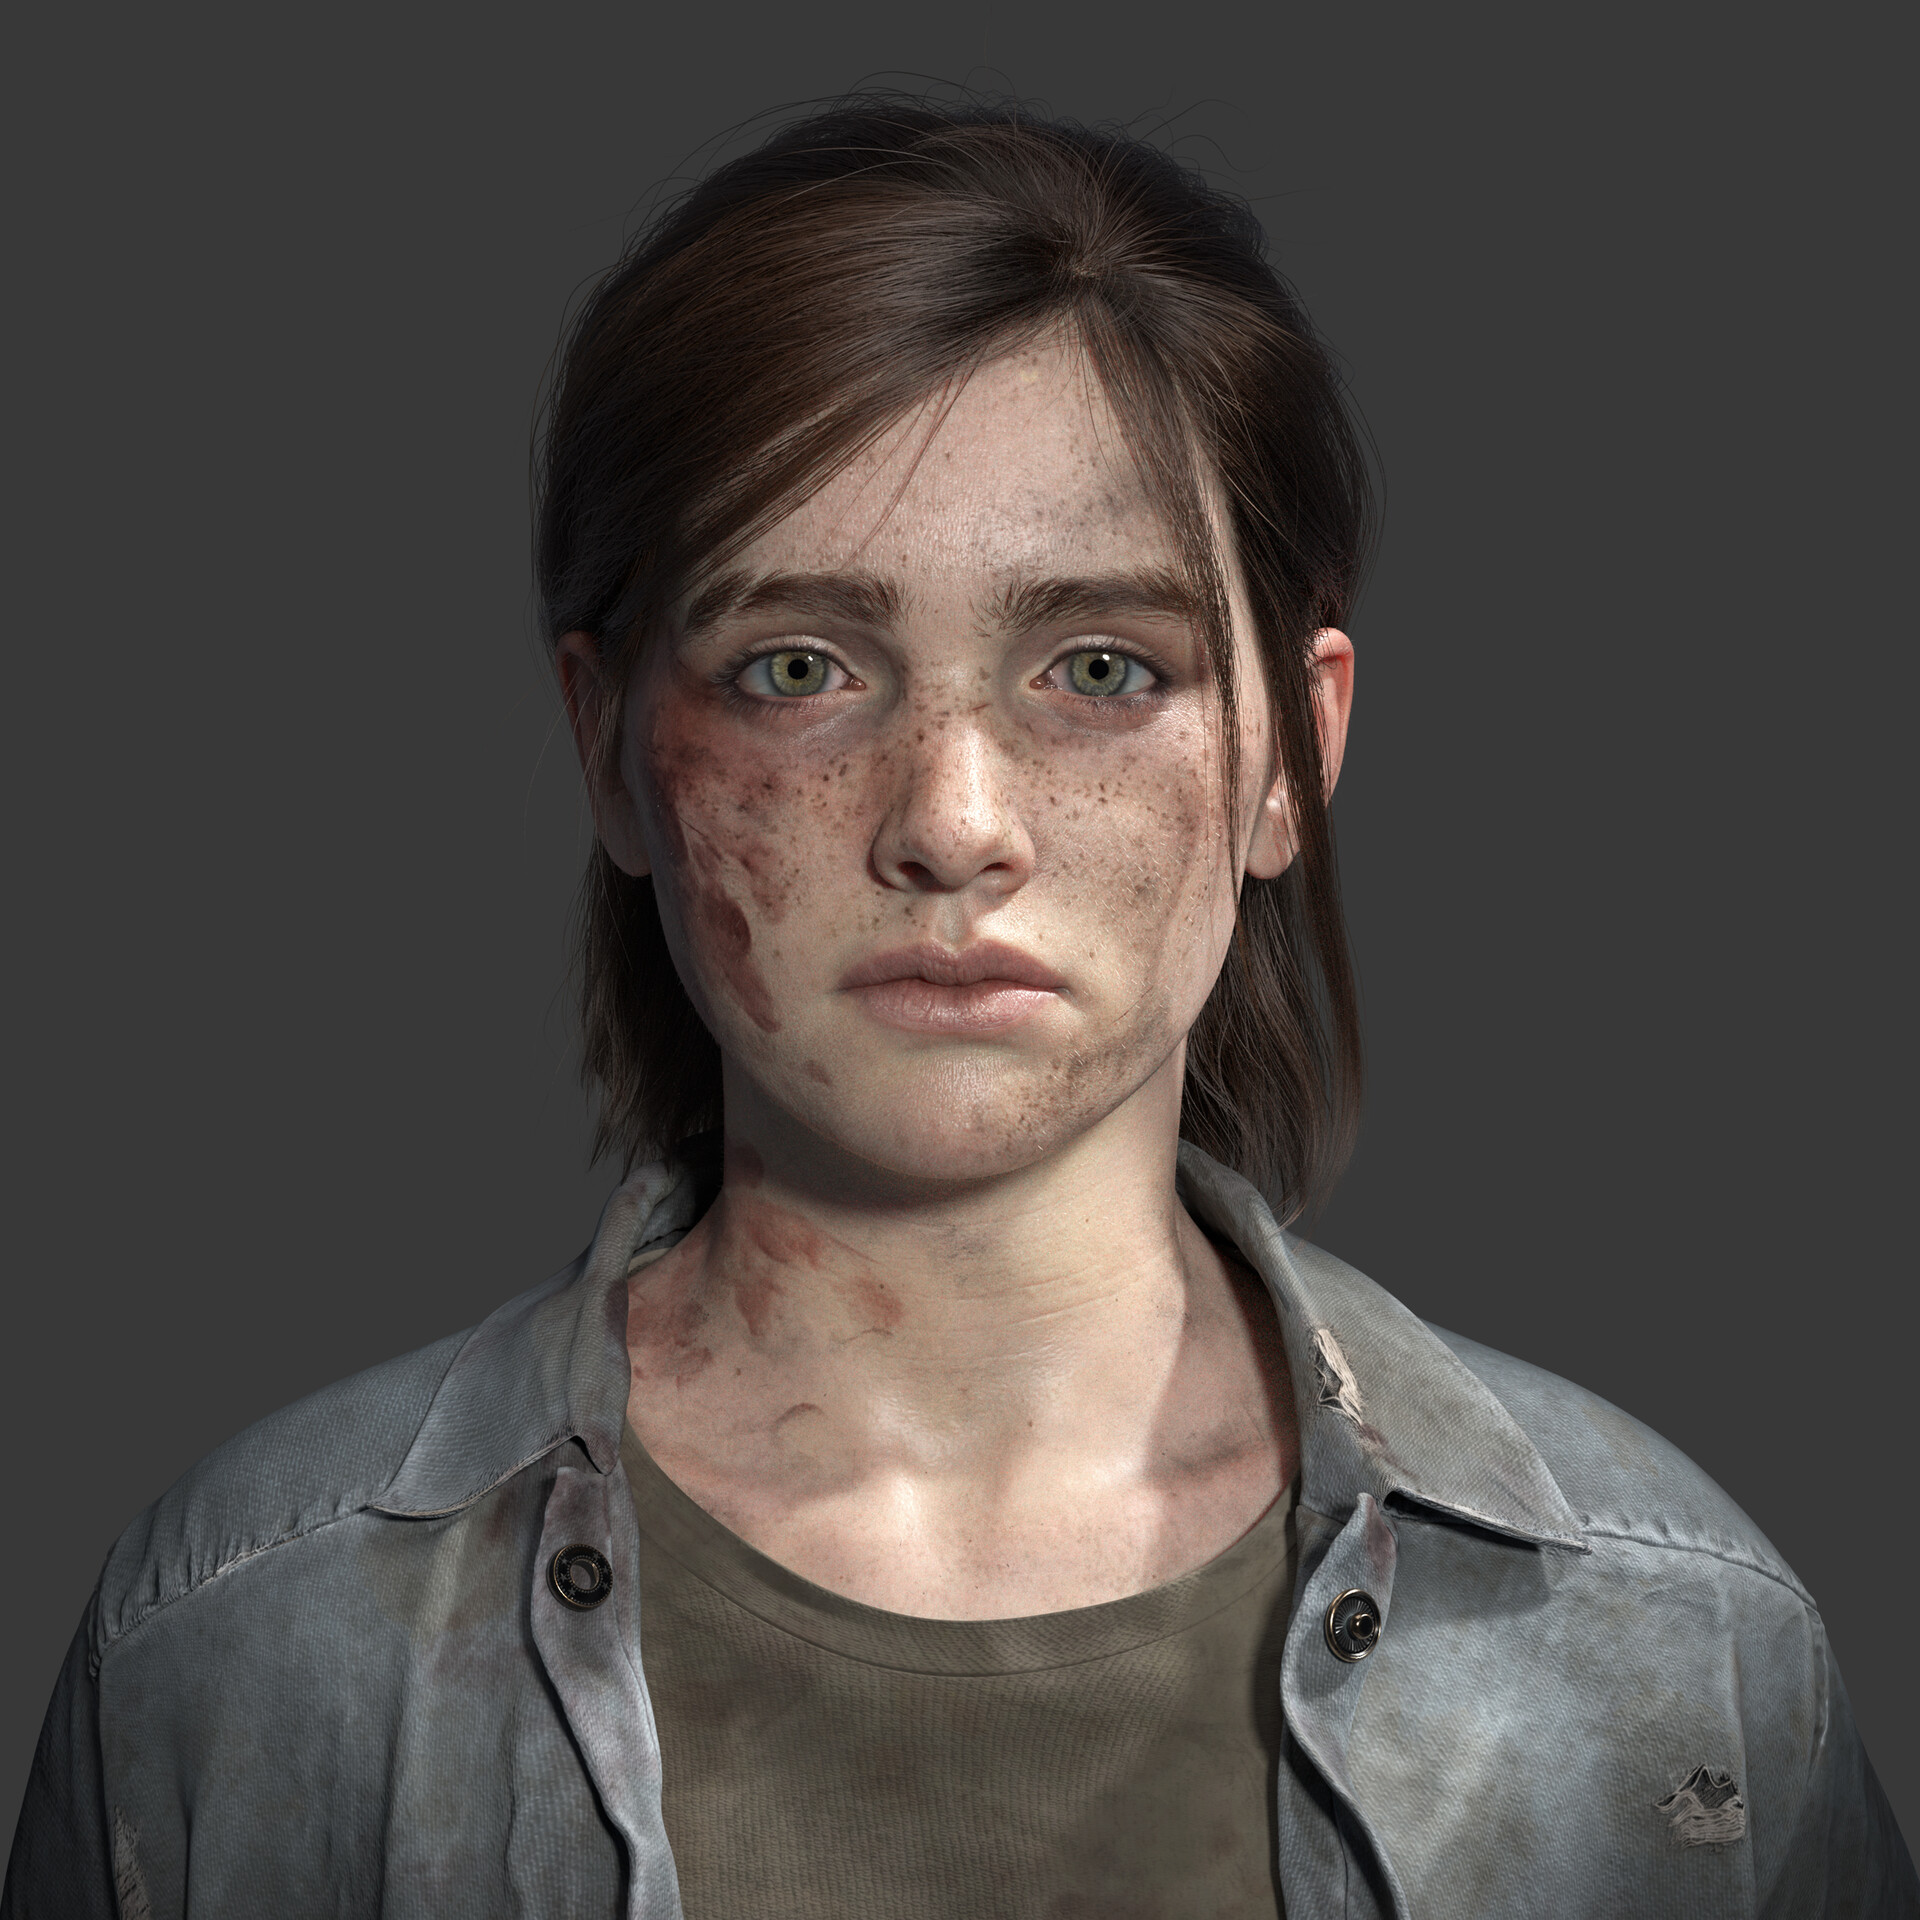 ellie from the last of us part II